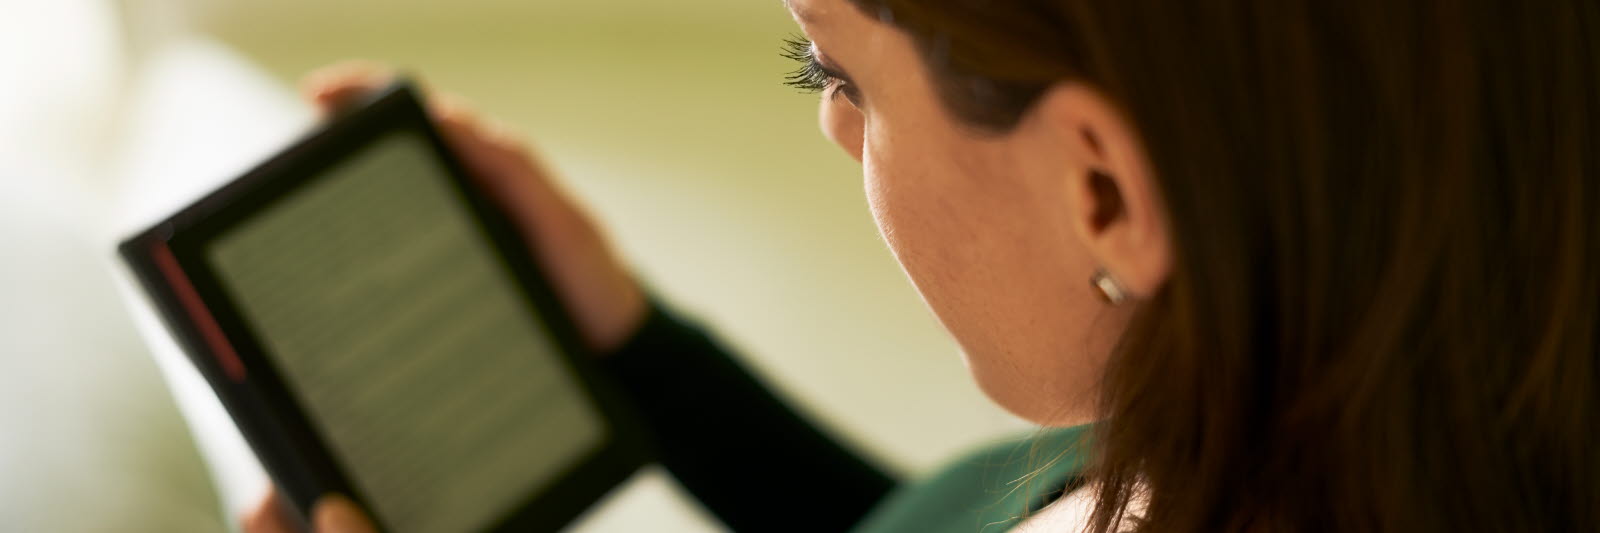 woman reading on a tablet Stiftung Lesen user case